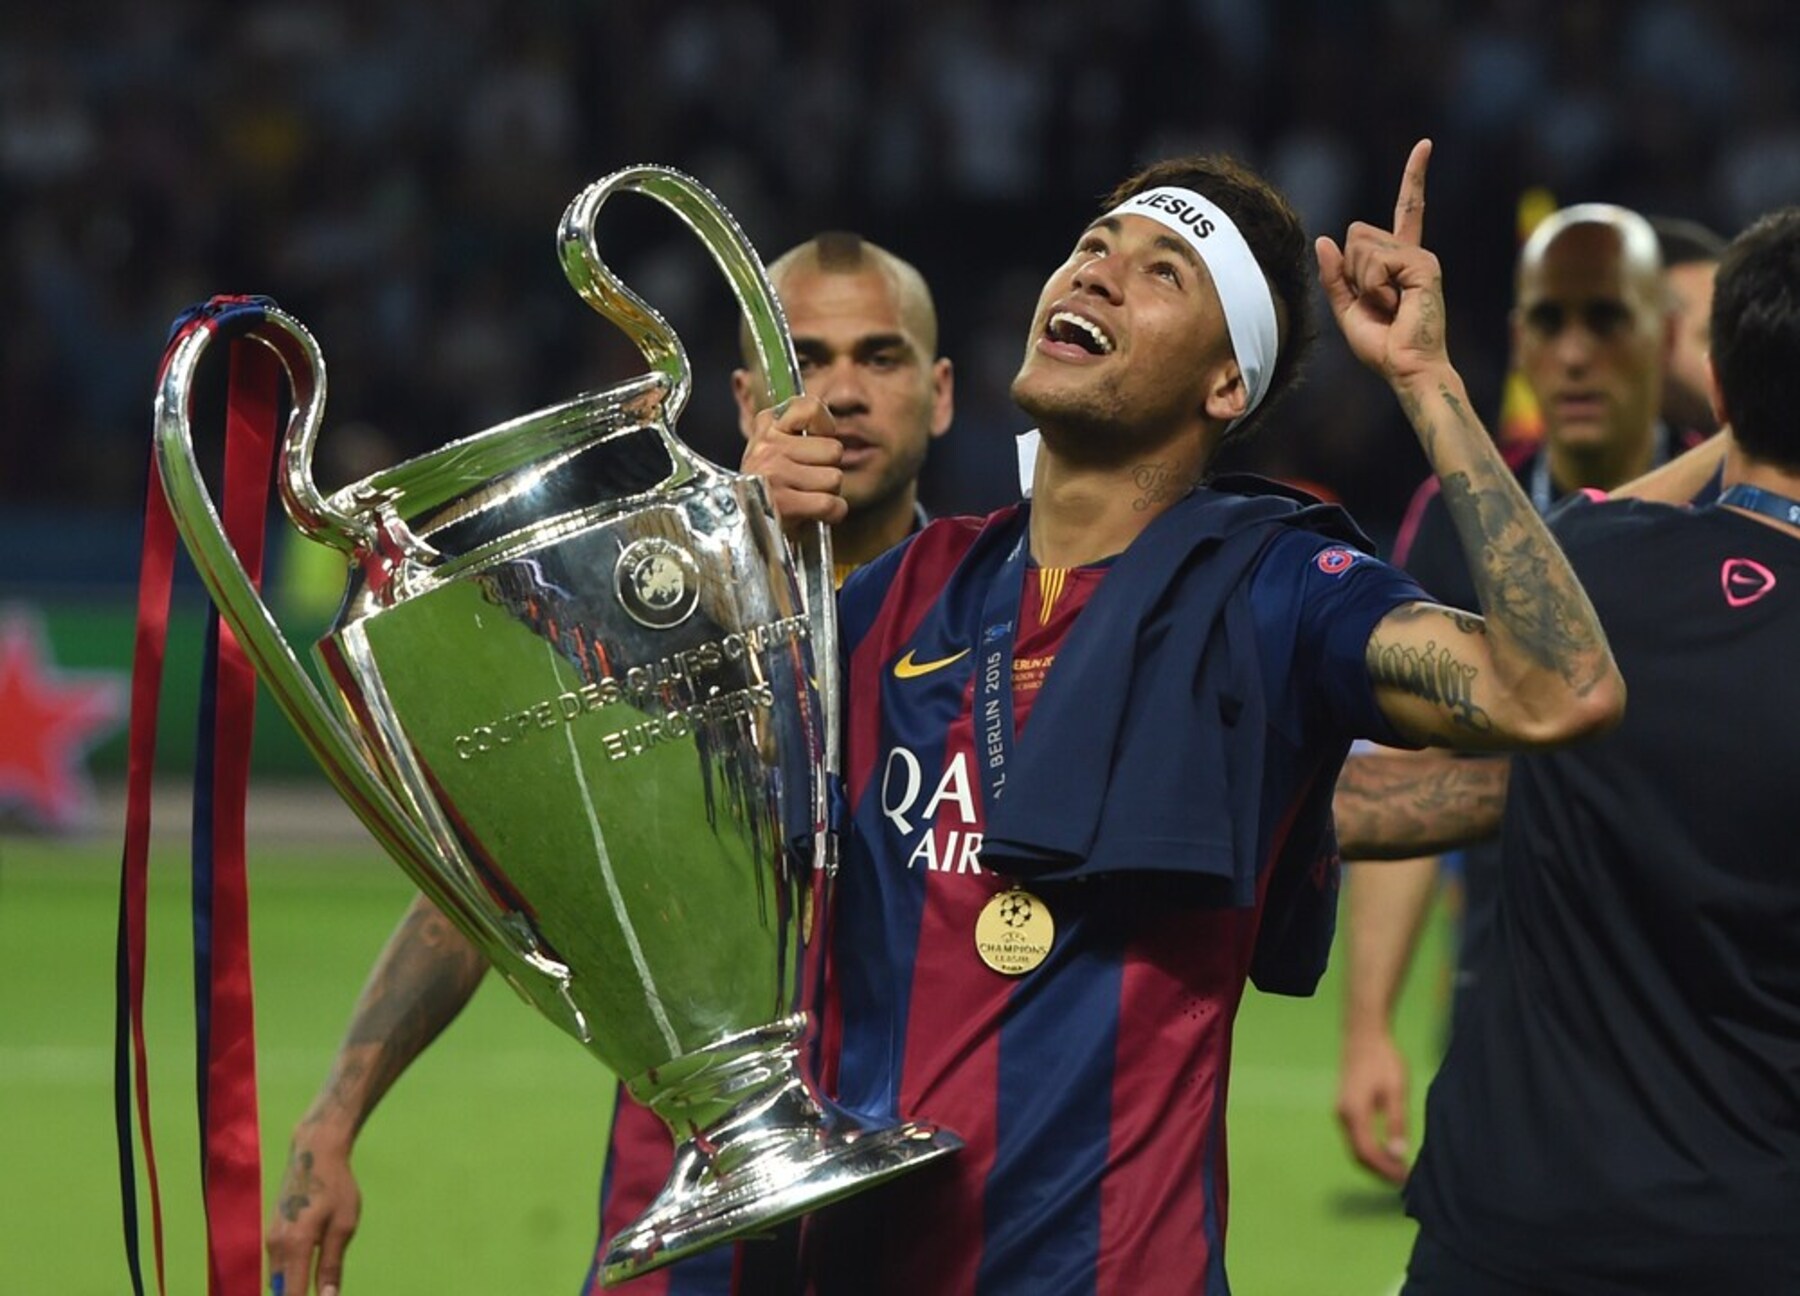 Dream Team - This was Neymar Jr.'s best moment of the UEFA